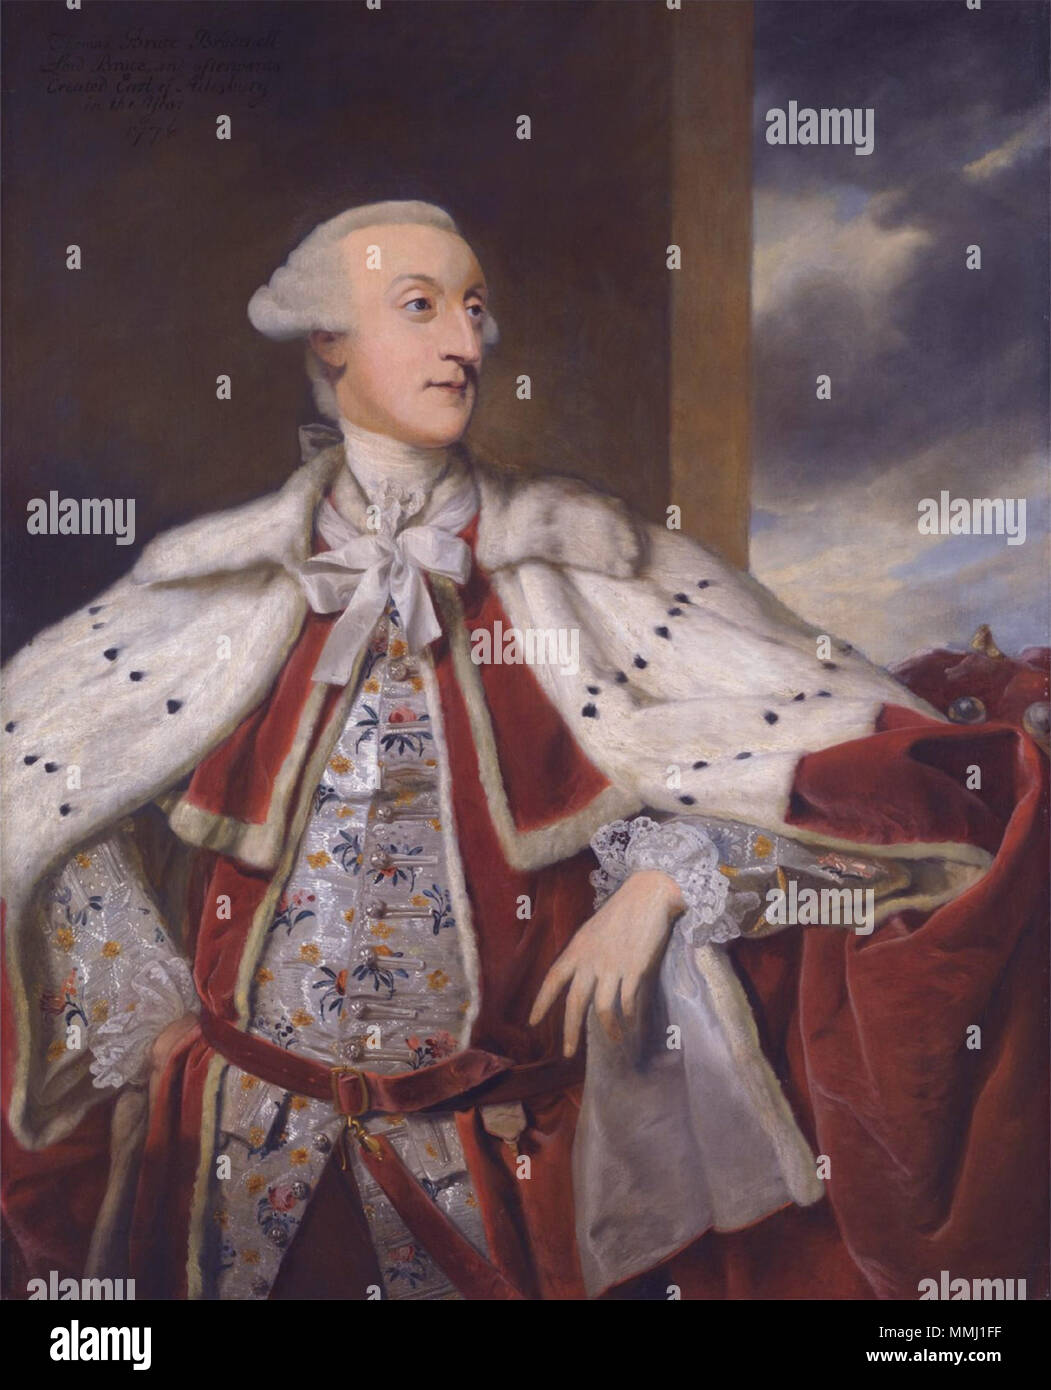 . A portrait of Thomas Brudenell-Bruce, 1st Earl of Ailesbury (30 April 1729 – 19 April 1814).  Portrait of Thomas Bruce Brudenell-Bruce, later 1st Earl of Ailesbury, in Peer's Robes.. 1776. Joshua Reynolds, Portrait of Thomas Bruce Brudenell-Bruce, later 1st Earl of Ailesbury, in Peer's Robes (1776) Stock Photo